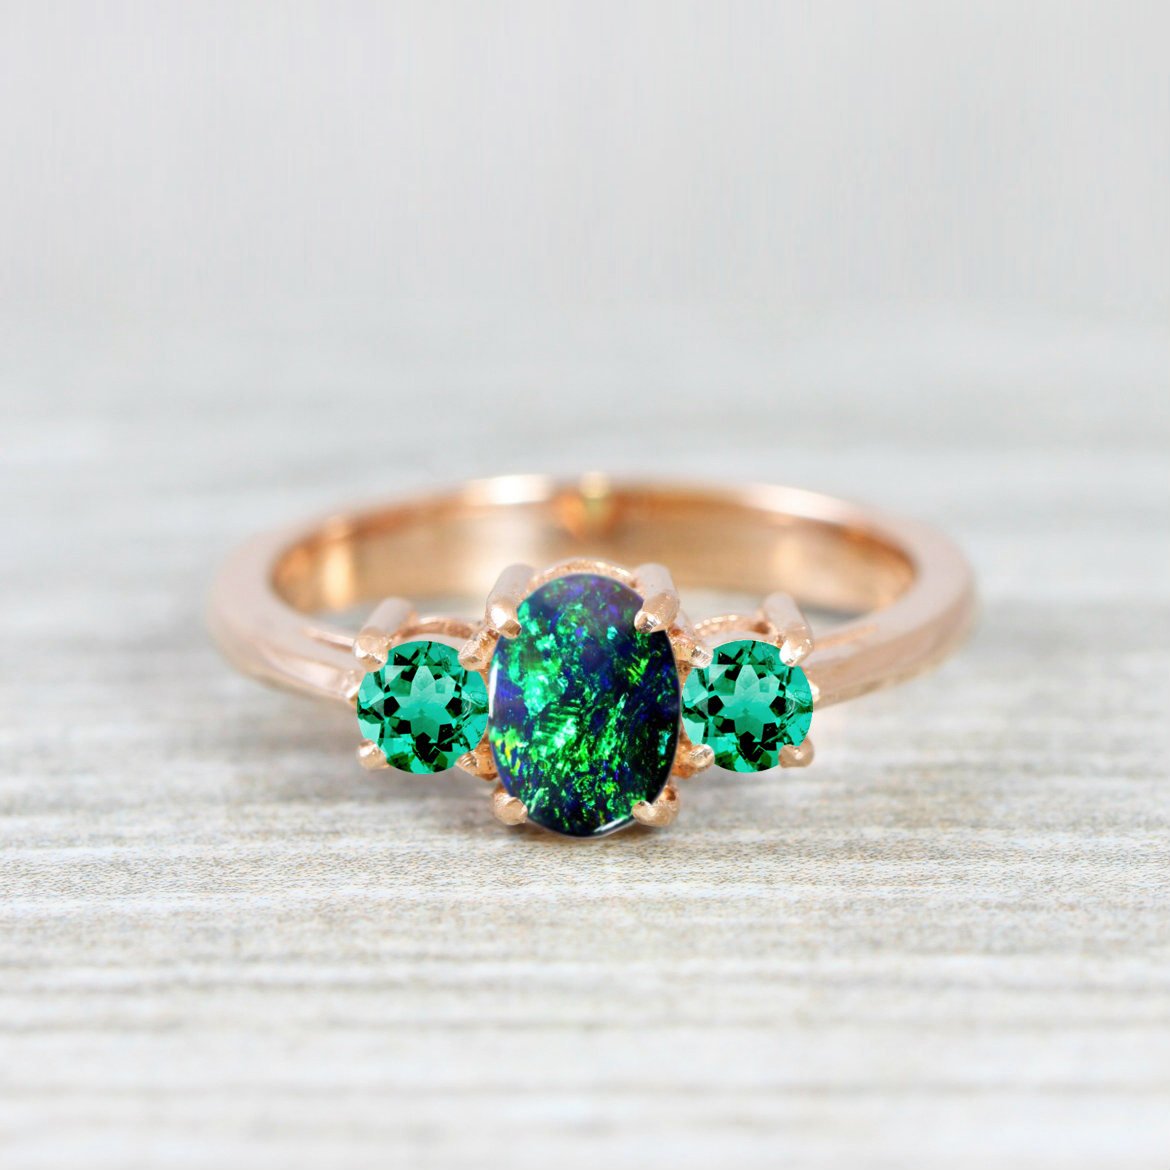 Gold ring with black opal as the stone and two emeralds on the side